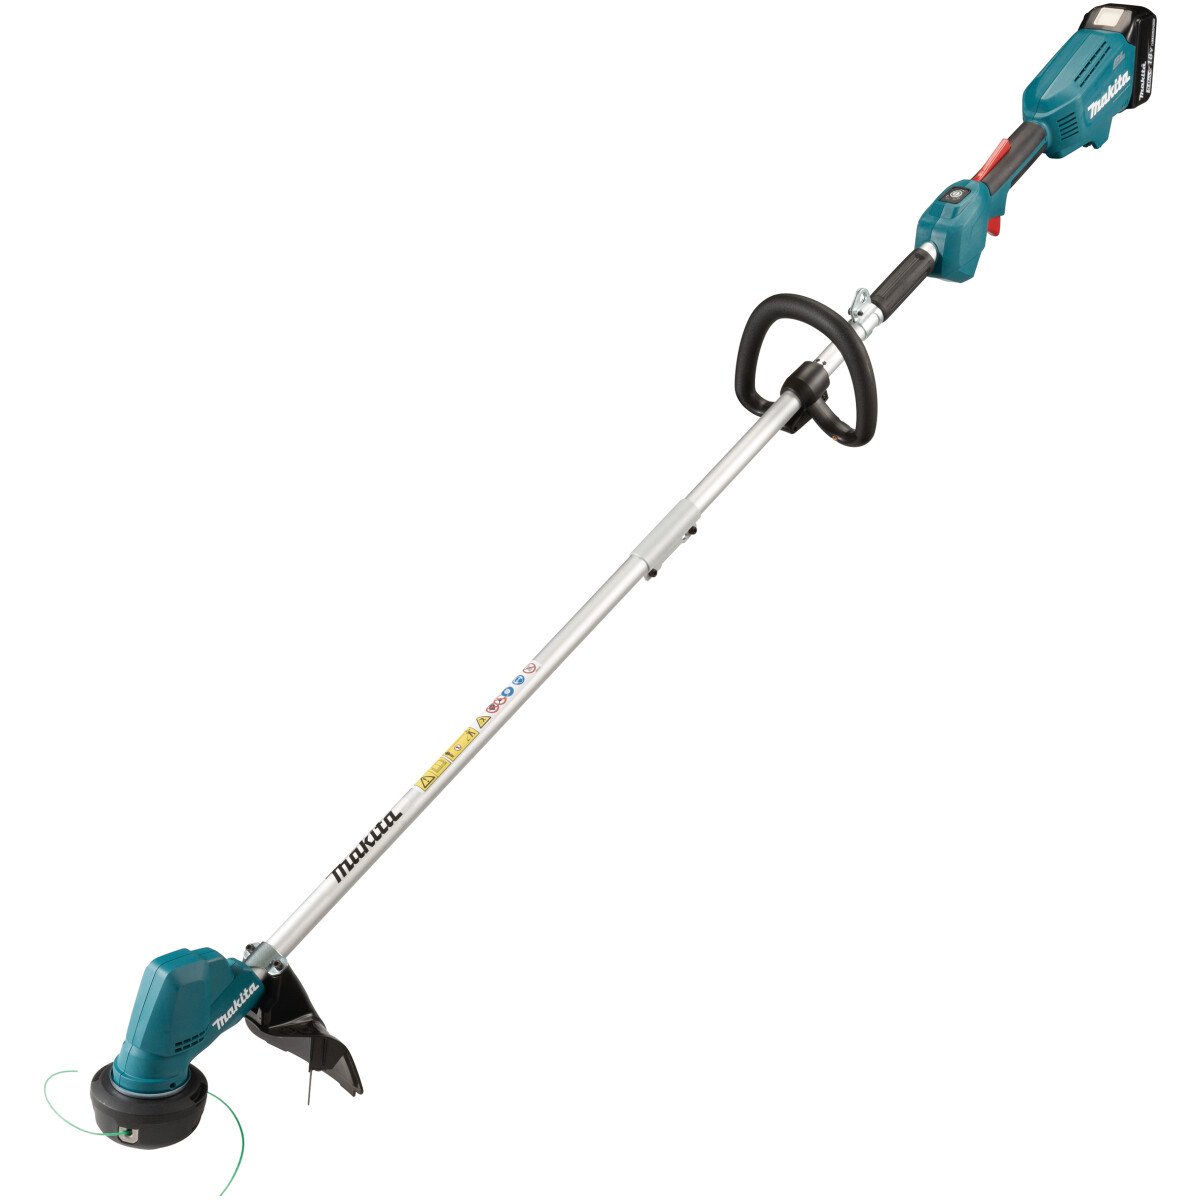 Makita DUR192LRT 18V LXT Brushless Line Trimmer with 1x 5.0ah Battery and Charger